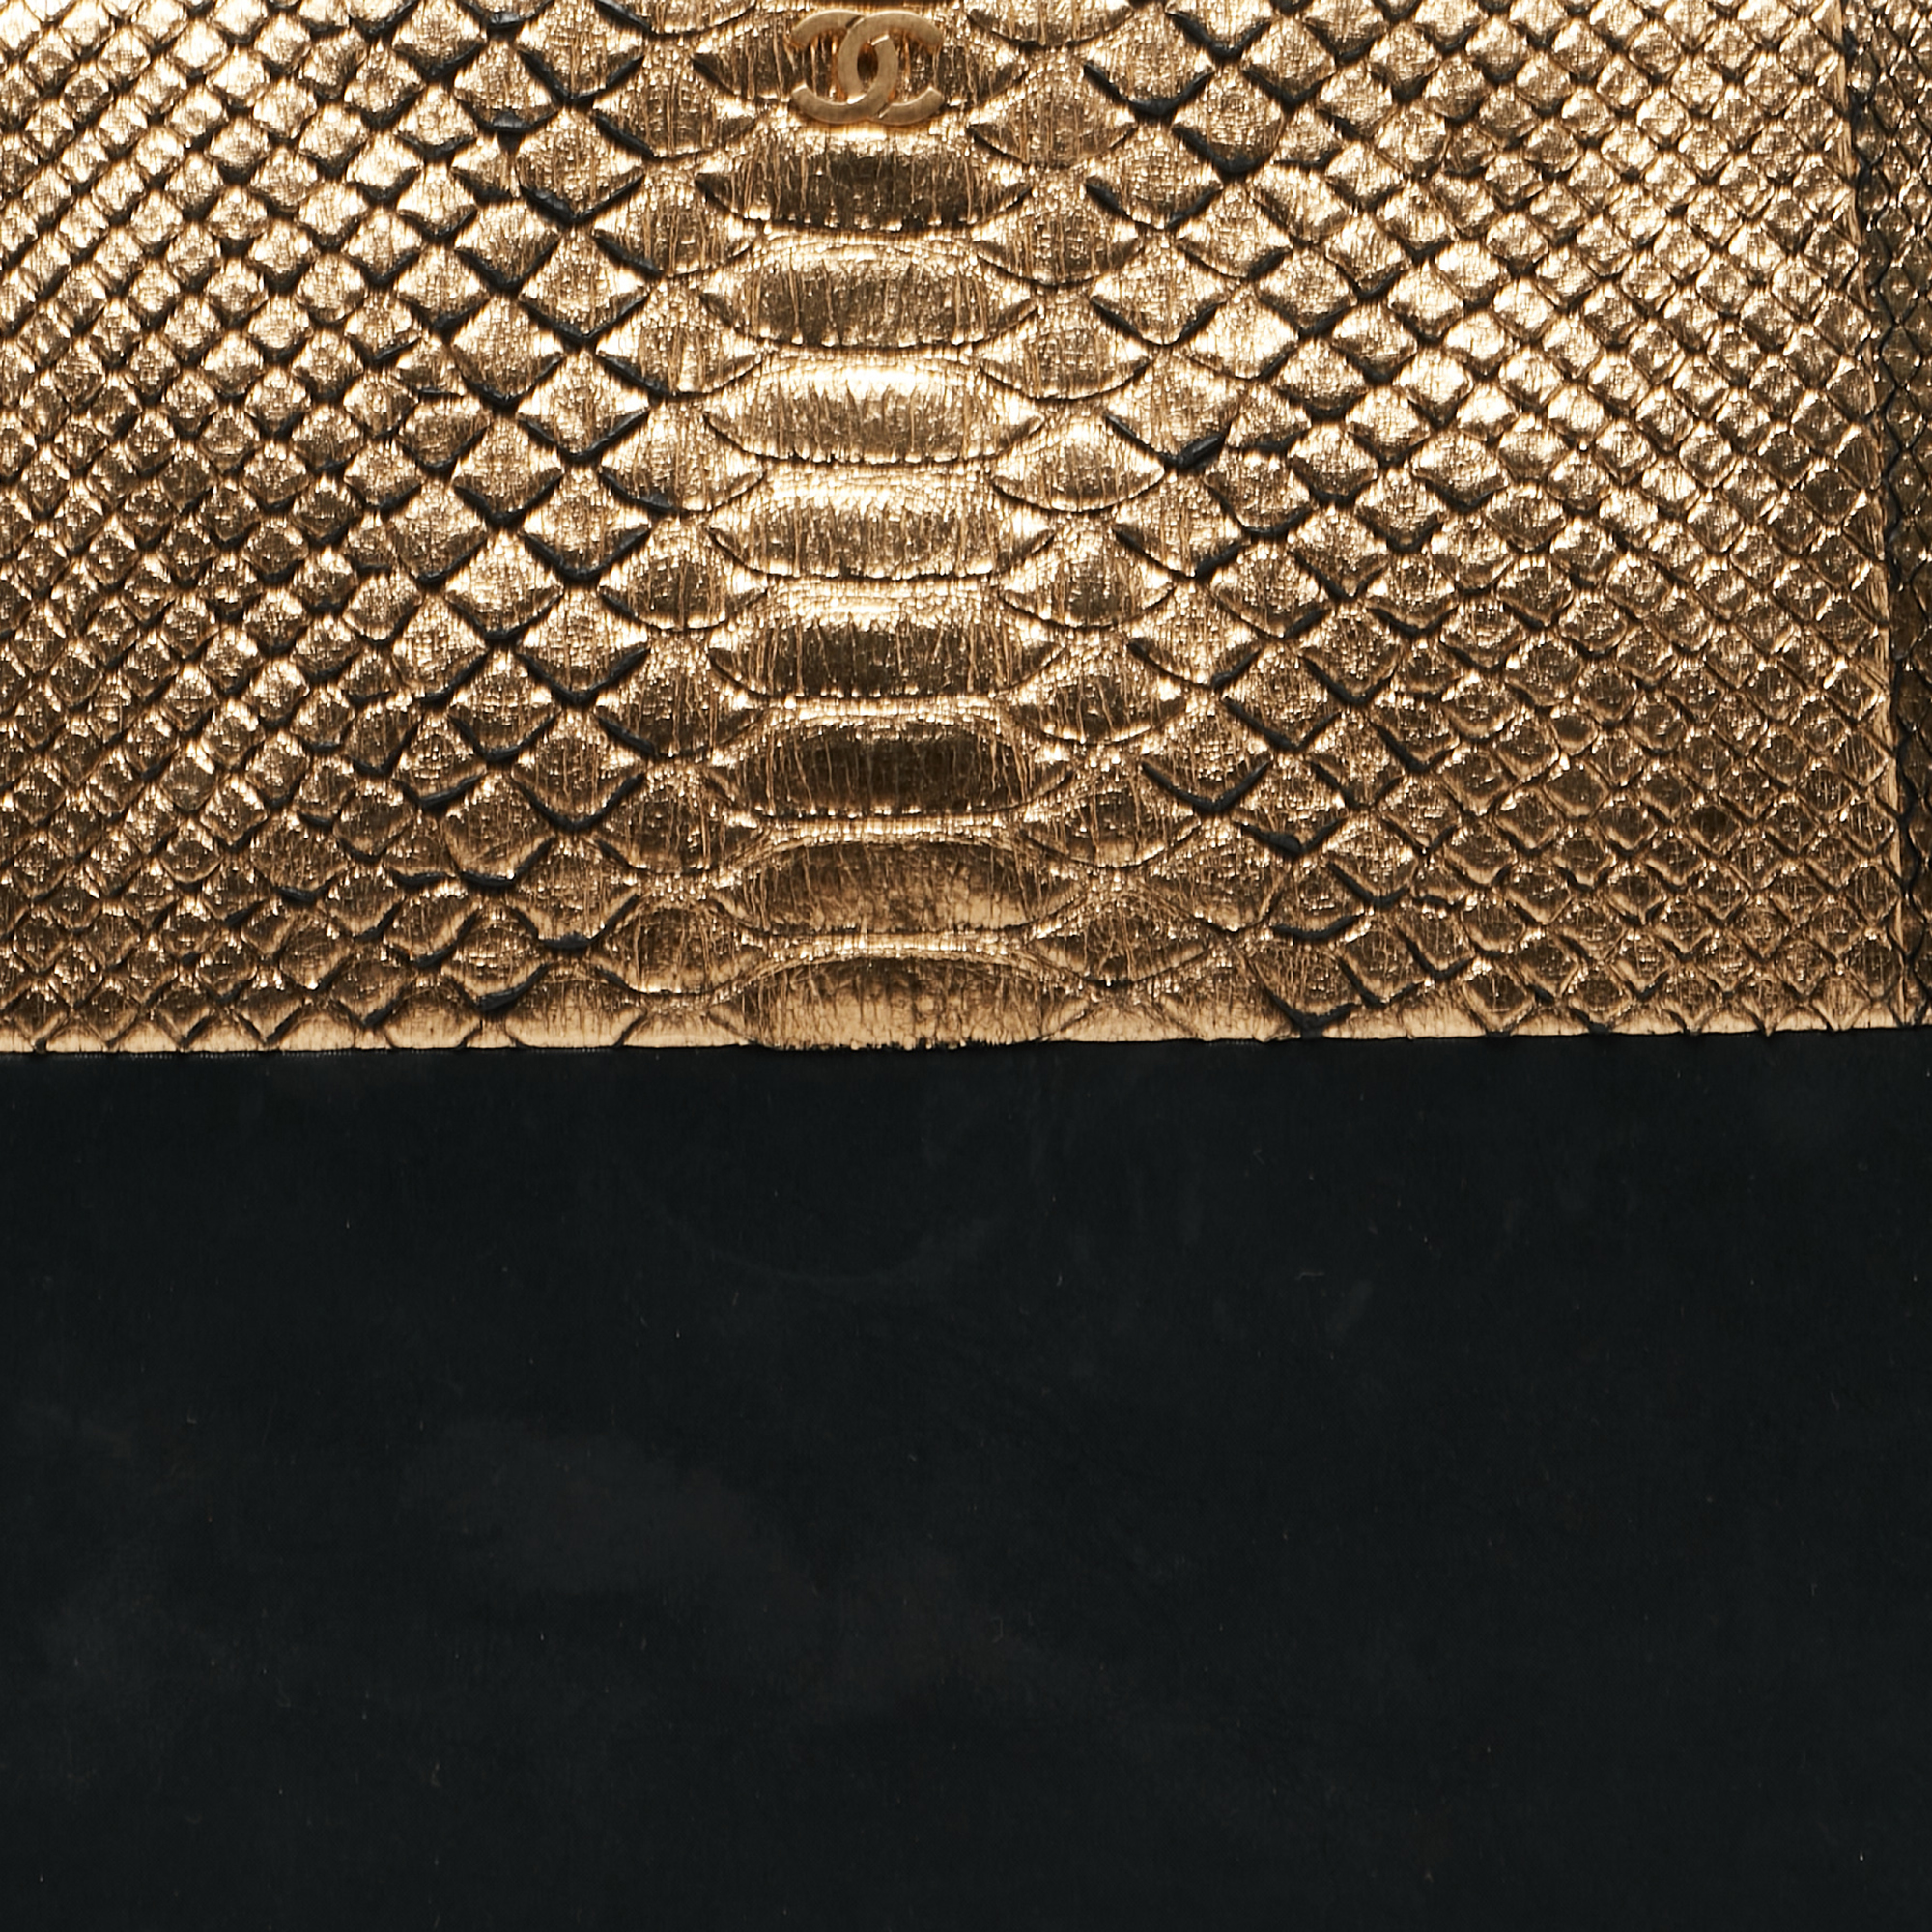 Chanel Gold/Black Python And Leather O Case Clutch